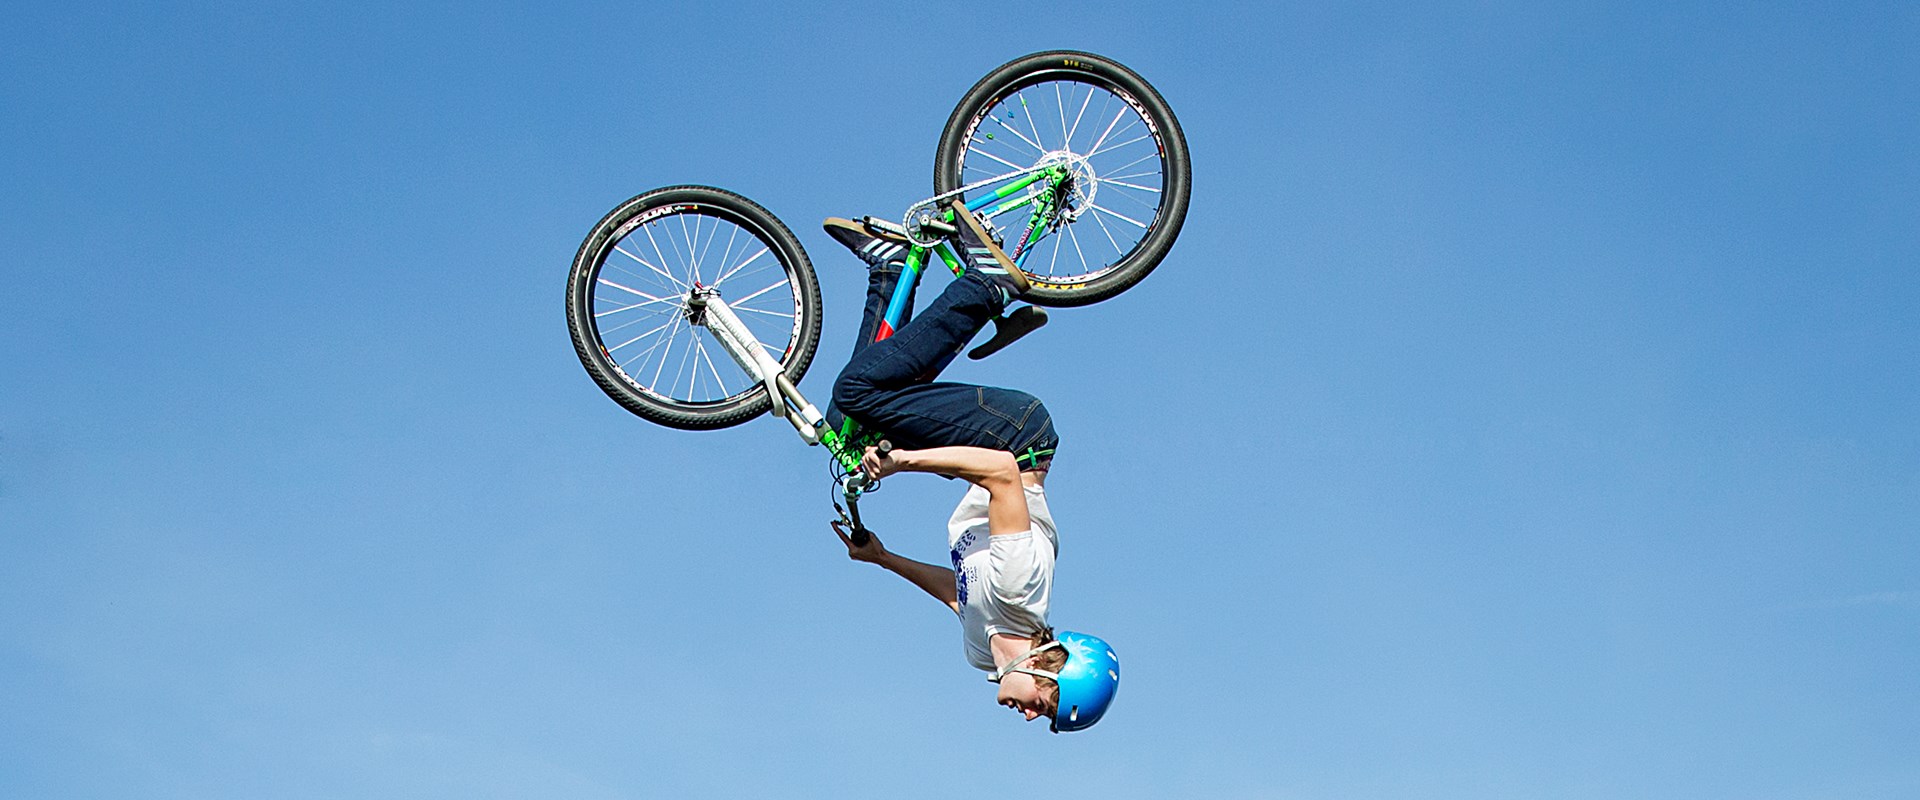 A cyclist in a blue helmet spins upside down against a blue sky.